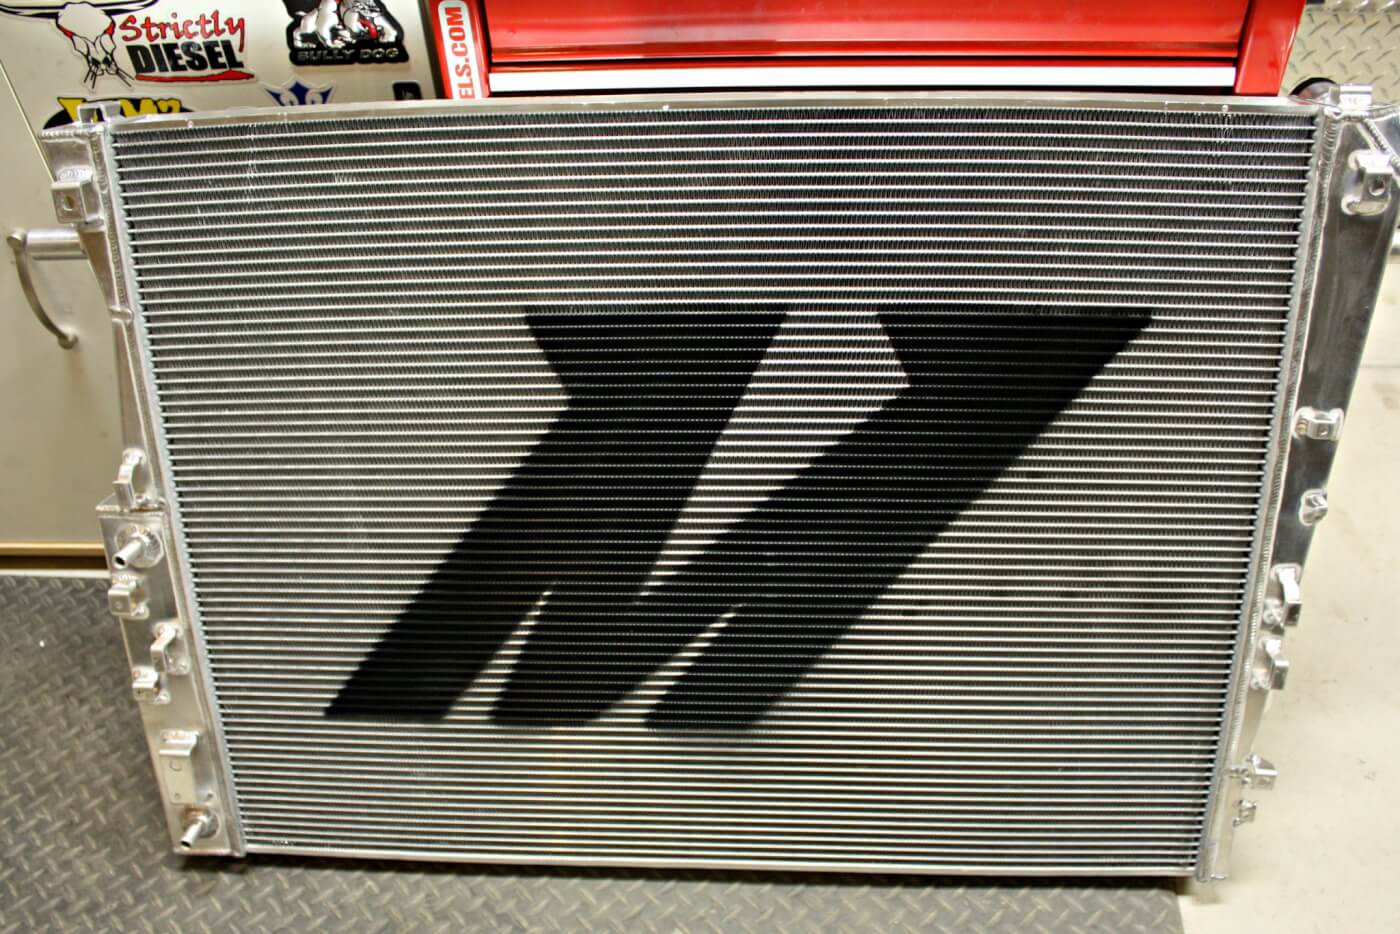 11. The new Mishimoto radiator features full-aluminum construction with TIG welded end tanks to prevent leakage issues that are known to plague the factory unit. Along with its more robust construction, the Mishimoto unit also adds capacity, holding 1.25 gallons more than the stock radiator. The increased capacity and core design aid in heat dissipation for improved cooling efficiency.